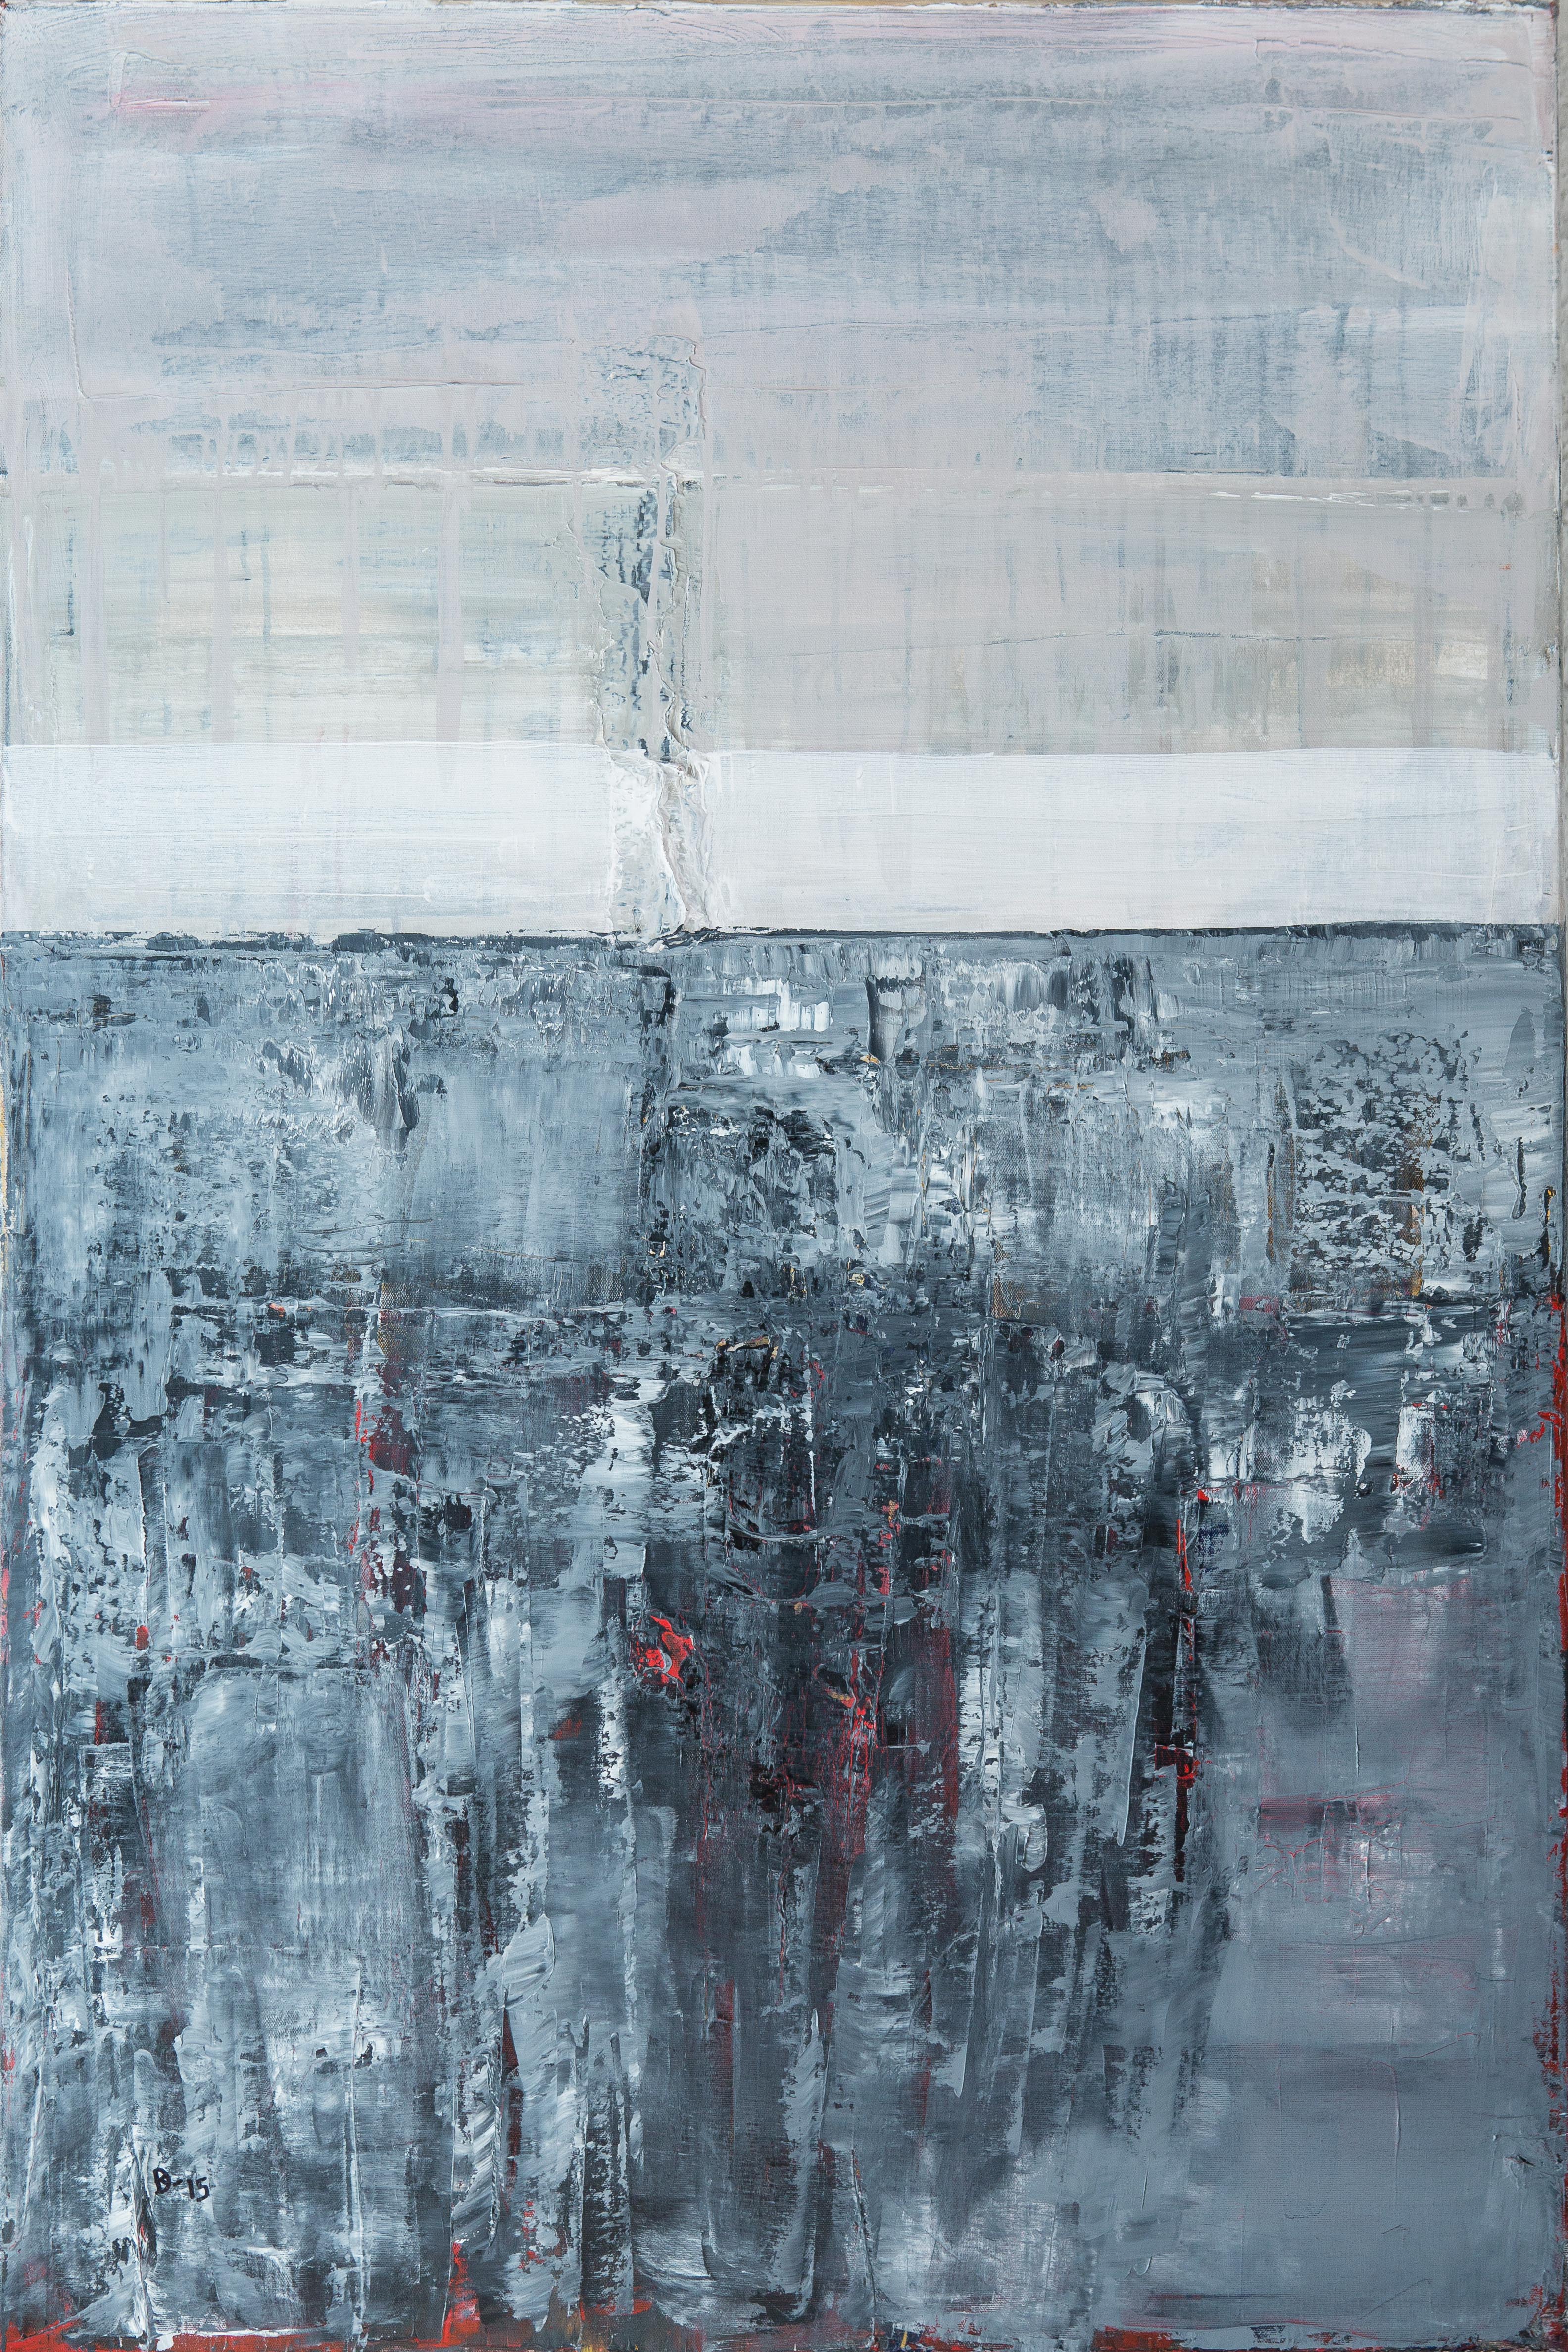 Pictures From No Man`s Land, 2015, acrylic on canvas, 80x120cm